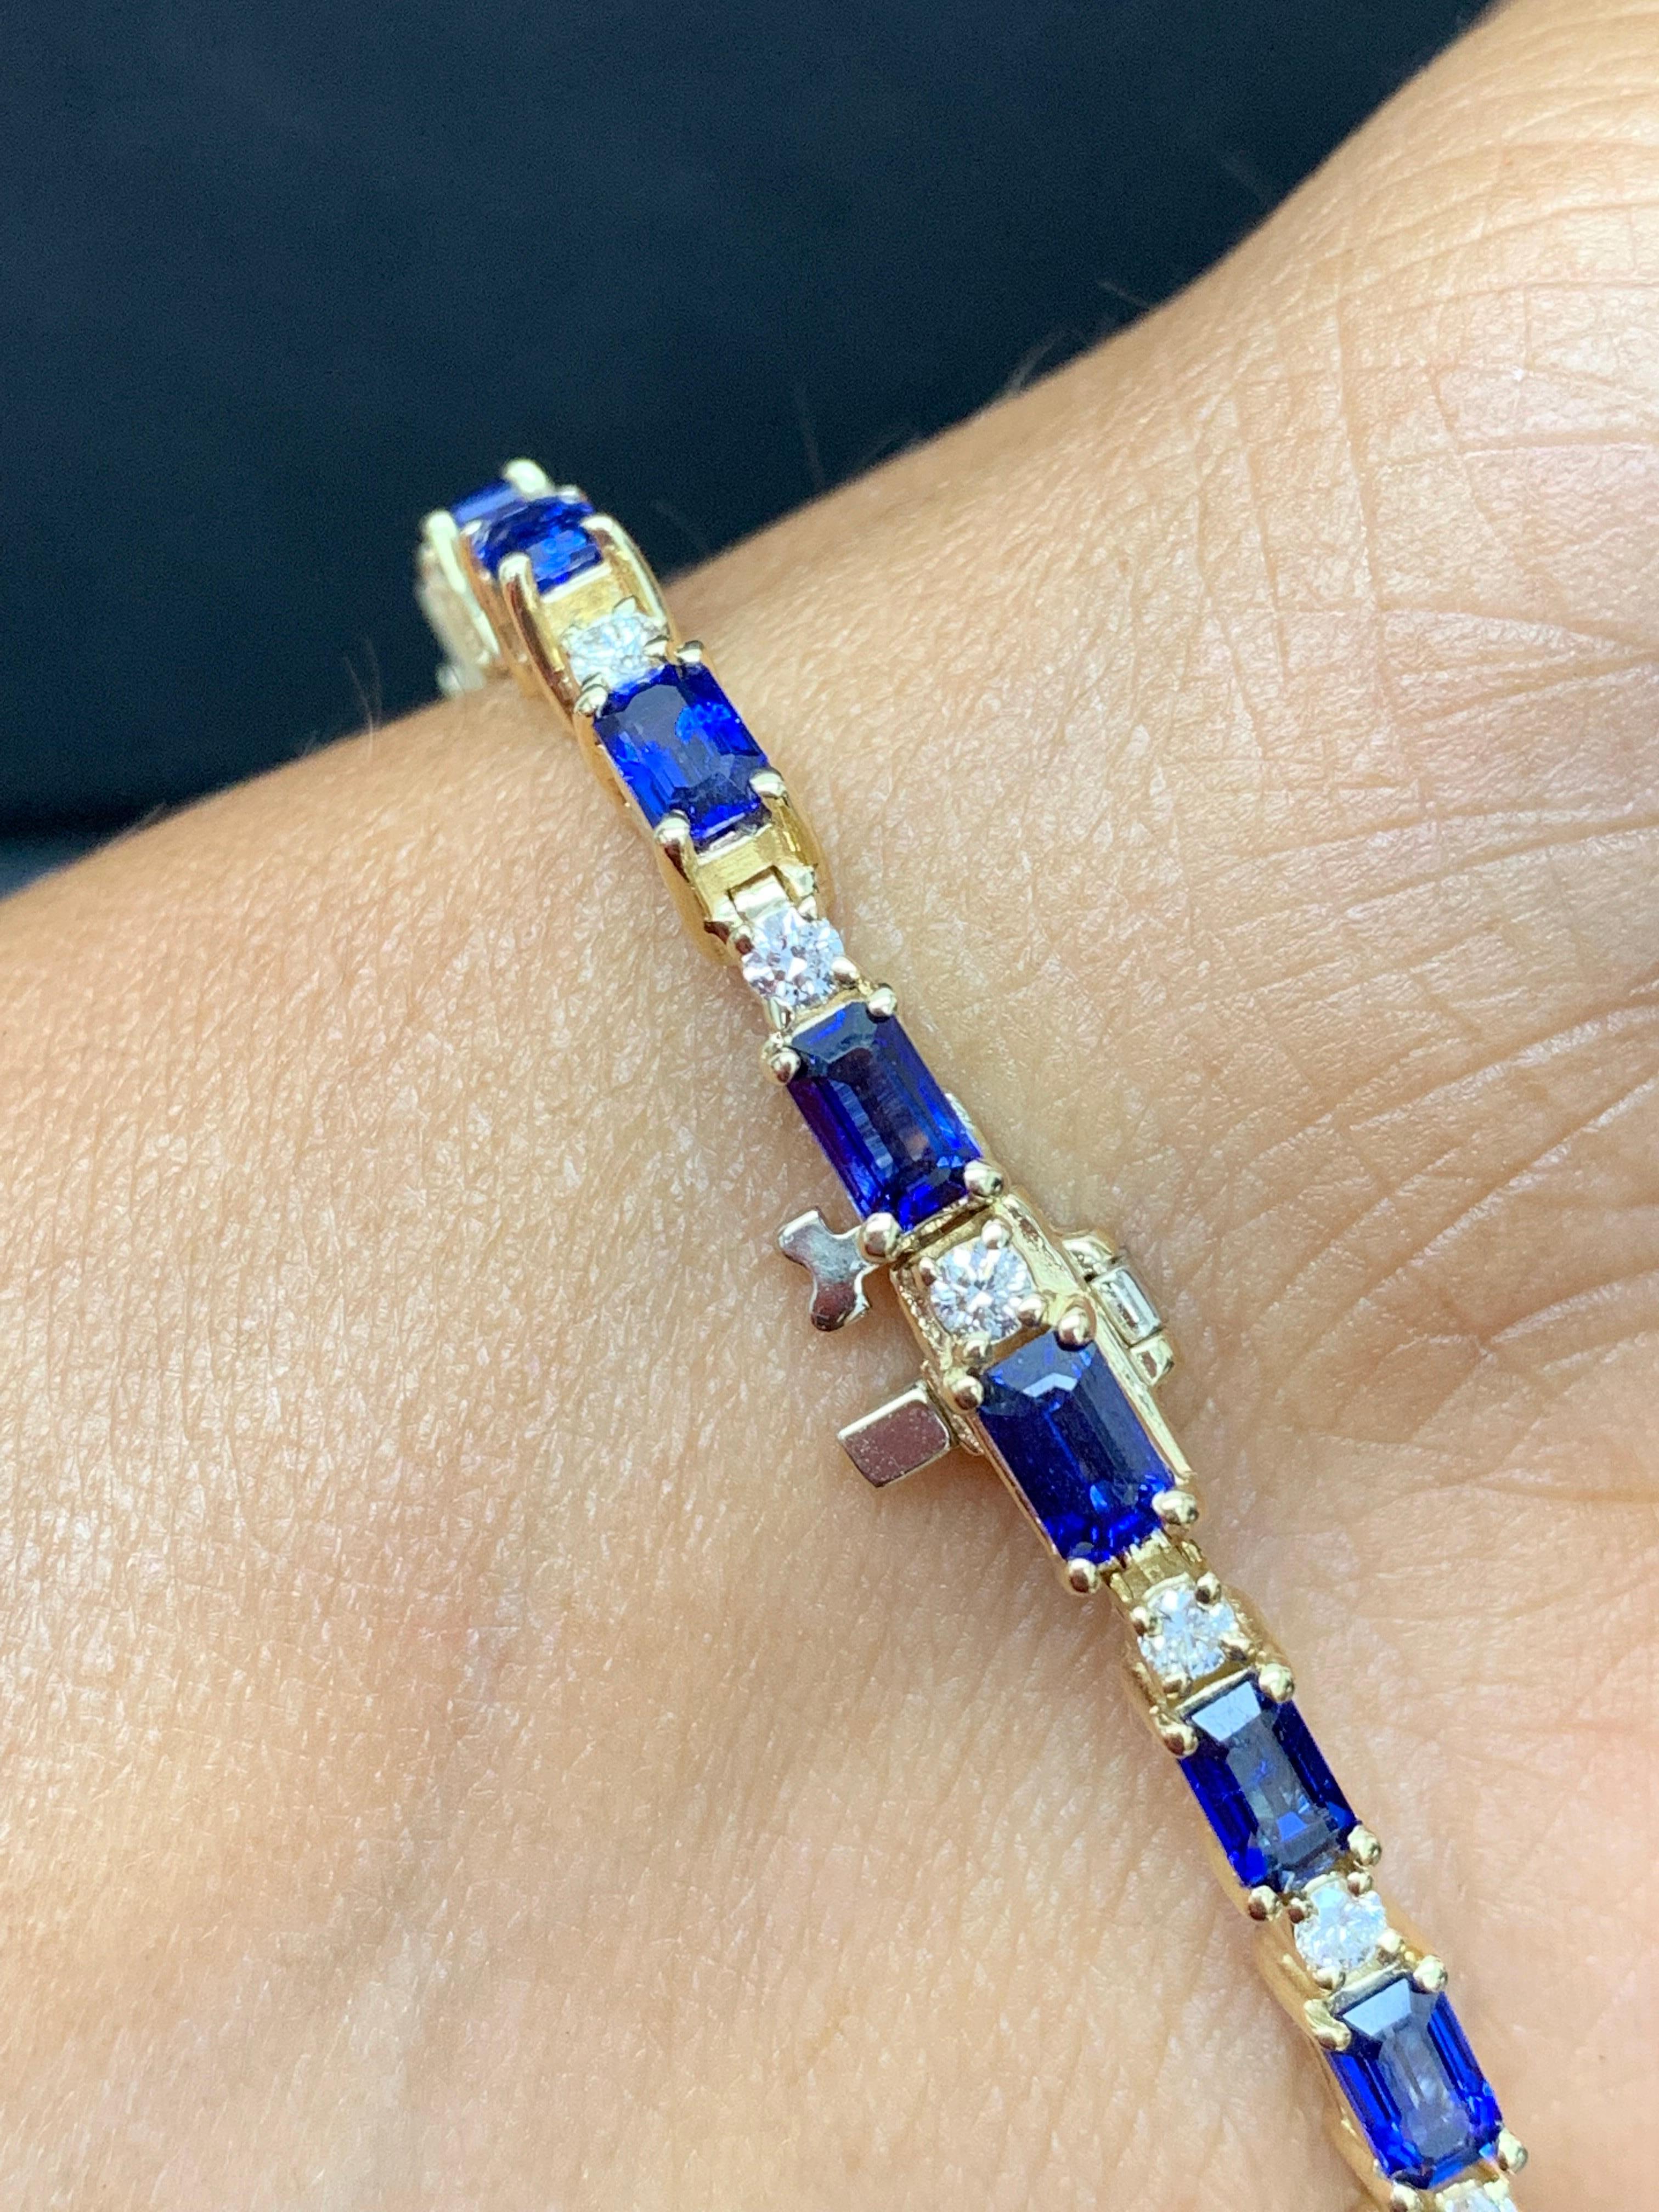 8.99 Carat Emerald Cut Blue Sapphire and Diamond Bracelet in 14K White Gold For Sale 7